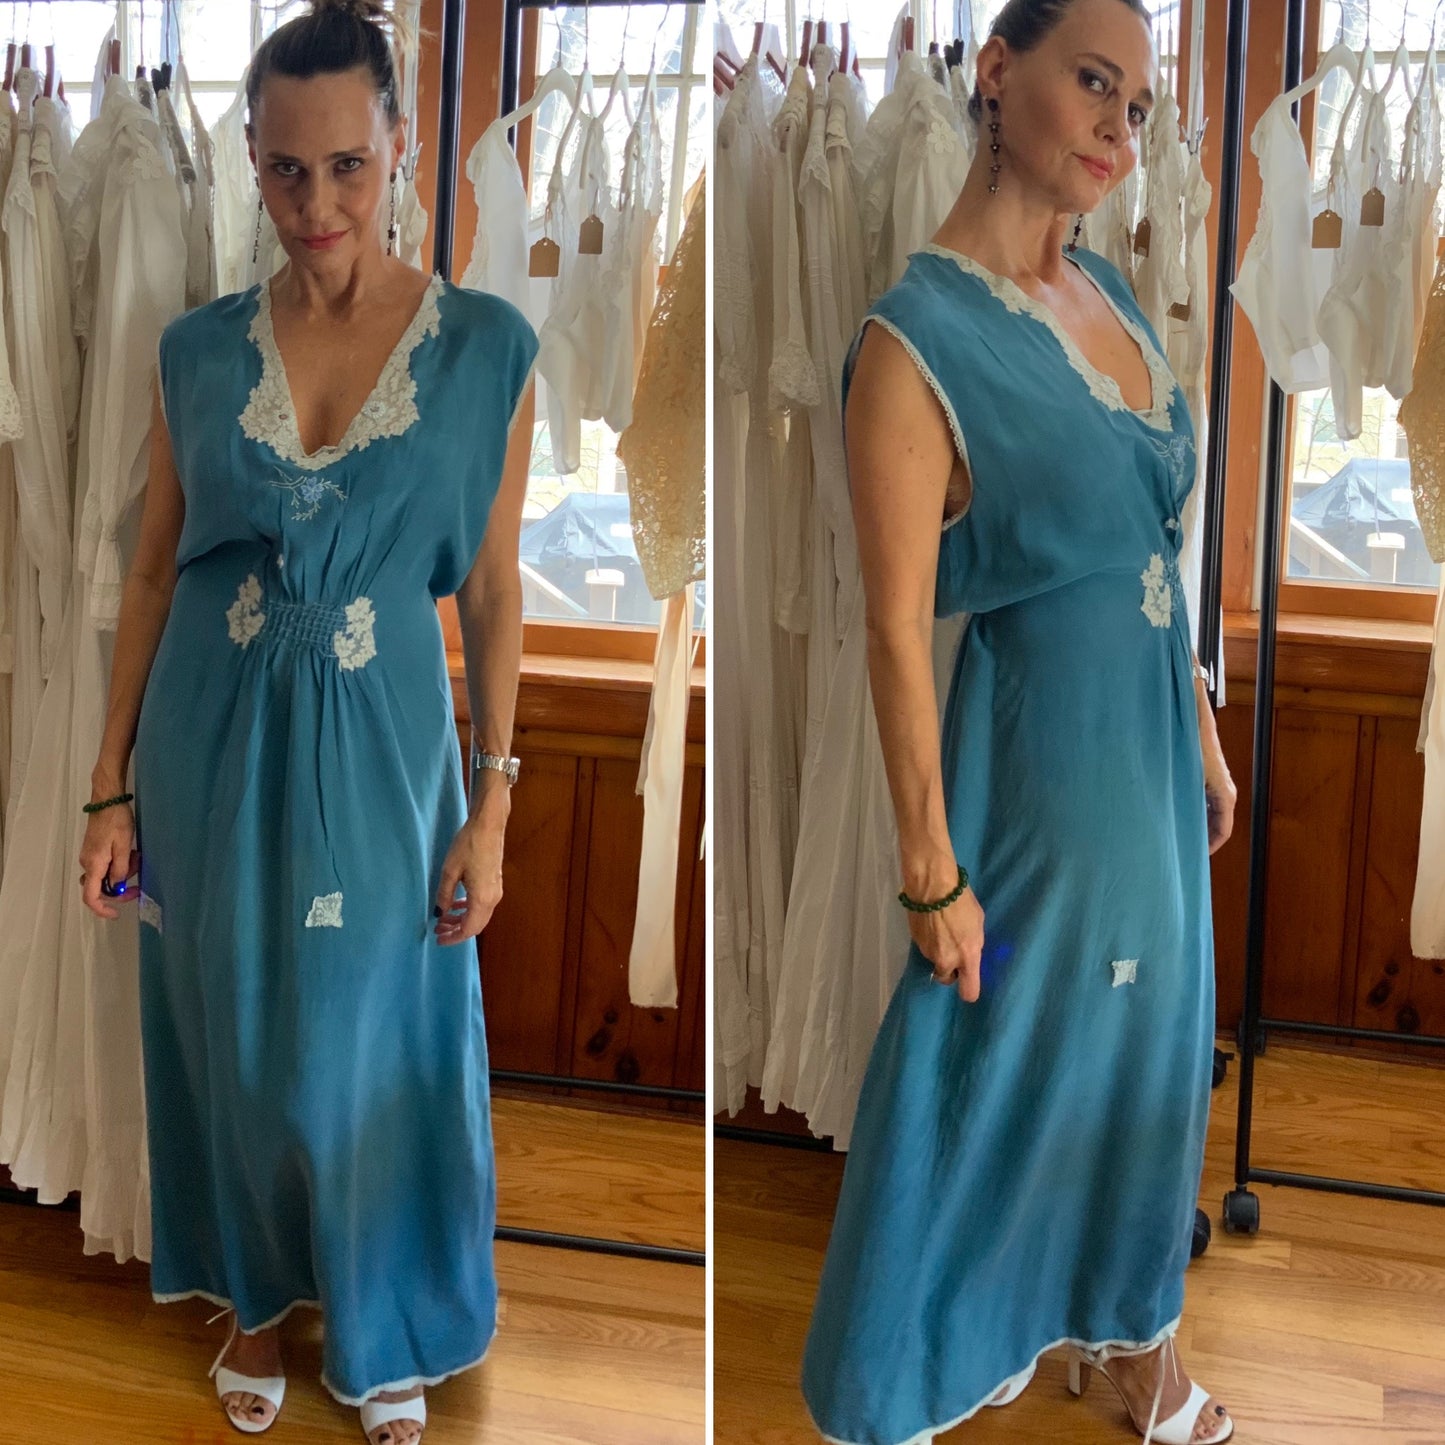 Silk Nightgown Hand Dyed Blue - 50s